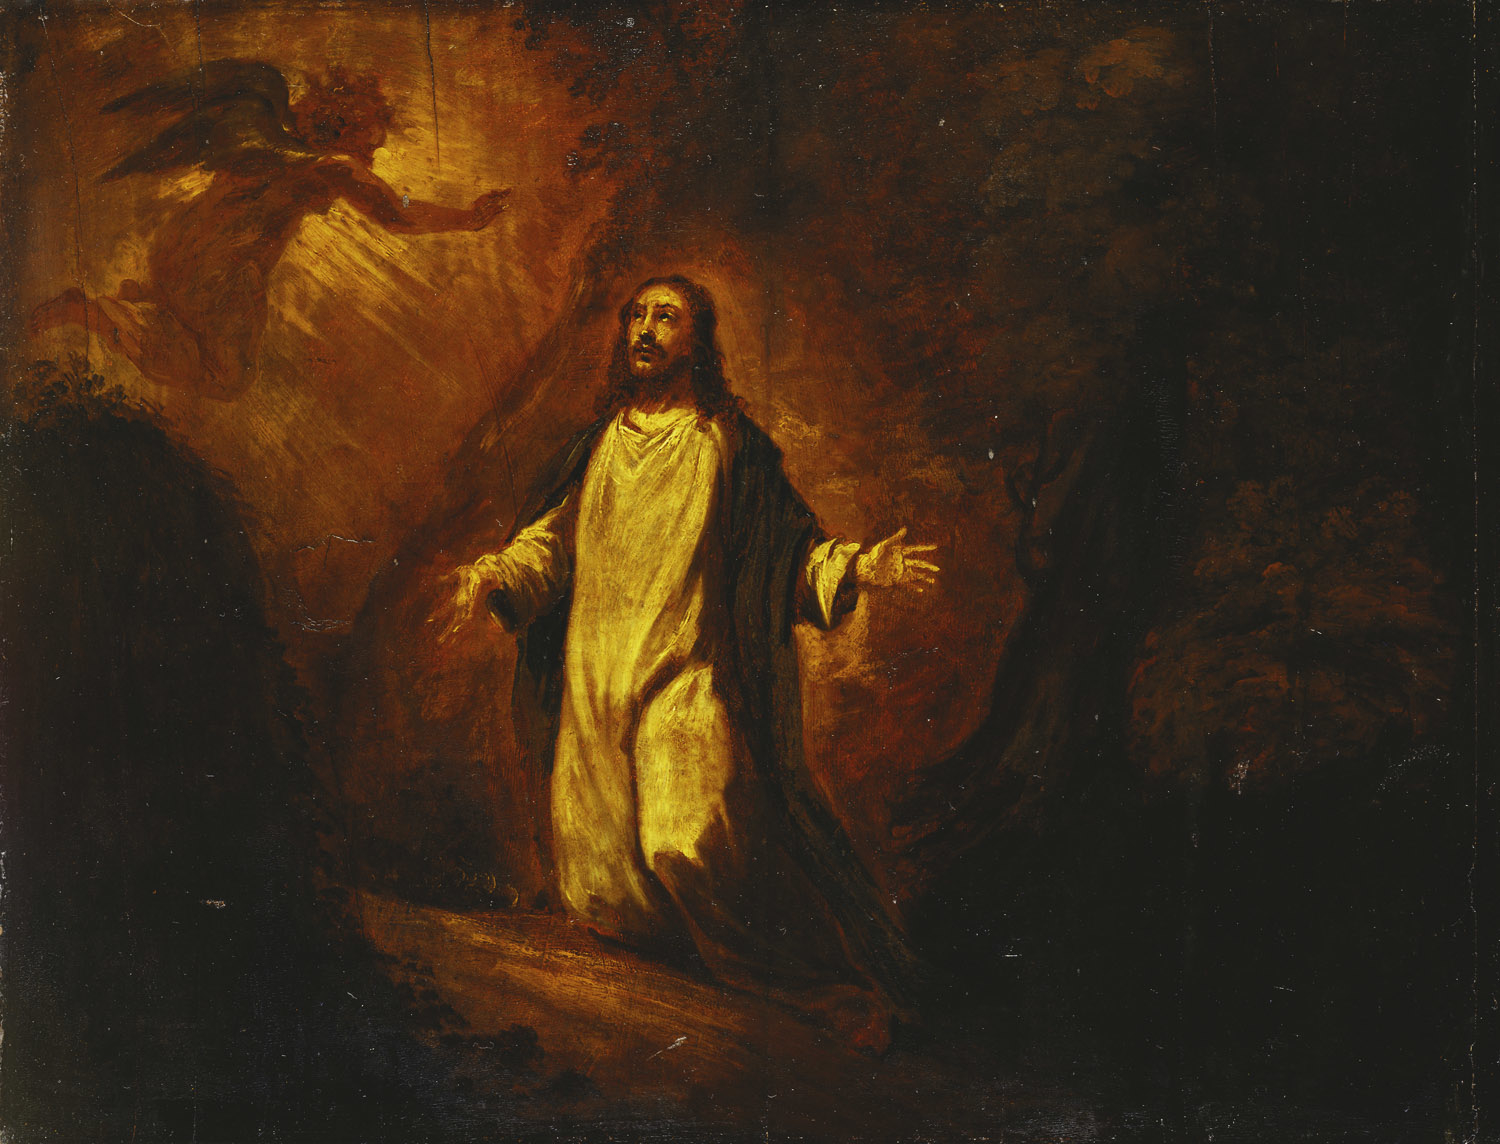 Christ in the Garden of Gethsemane (after Titian)